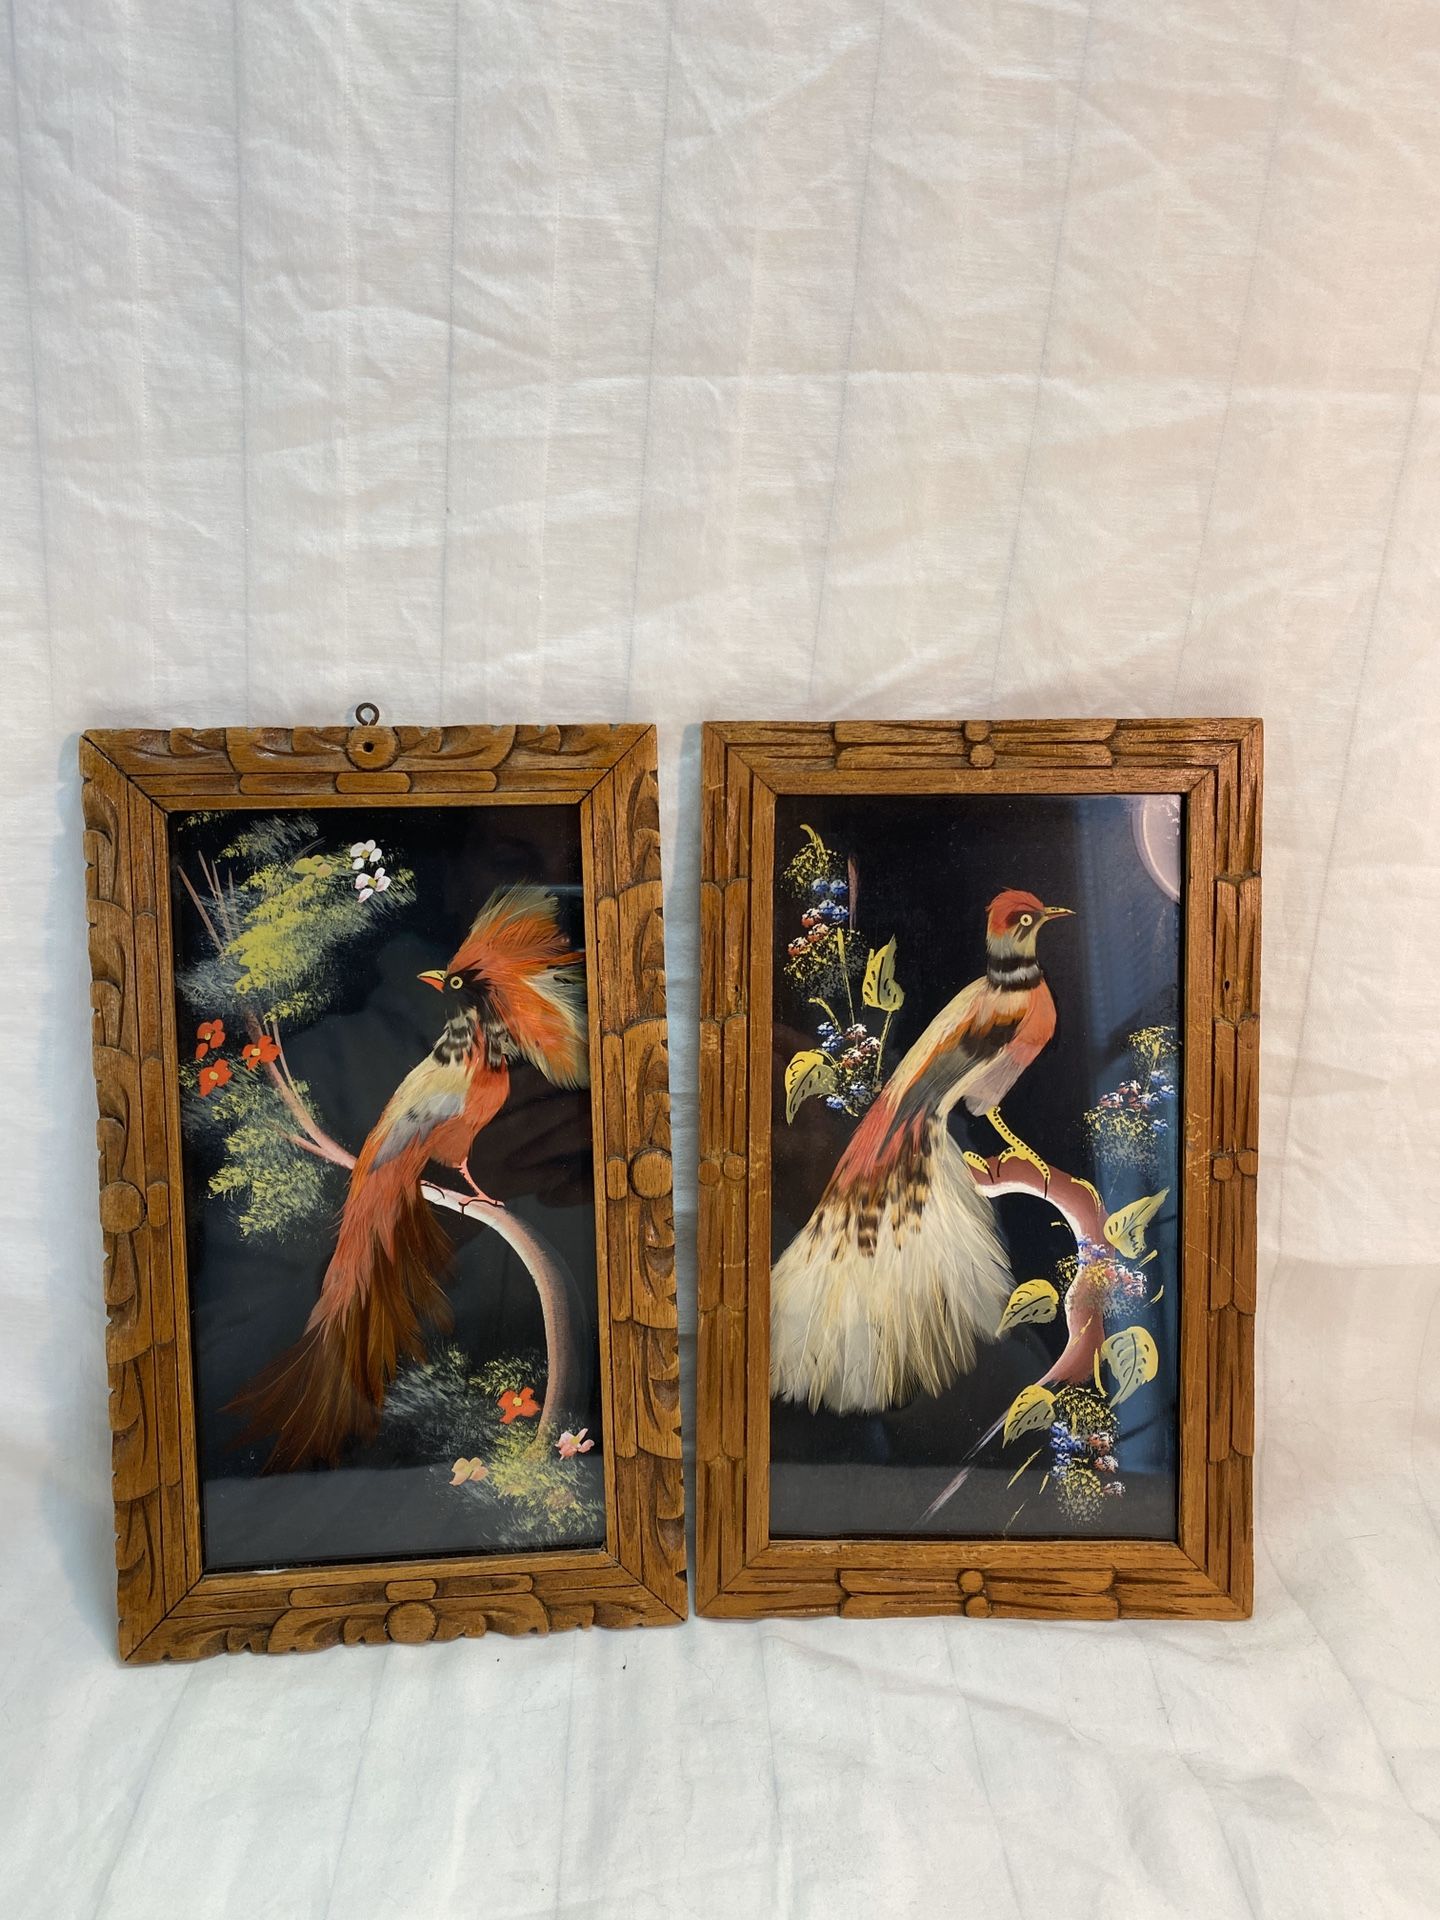 2 Vintage Wooden Framed Mexican Feathercraft Feather Craft Bird Pictures MEXICO